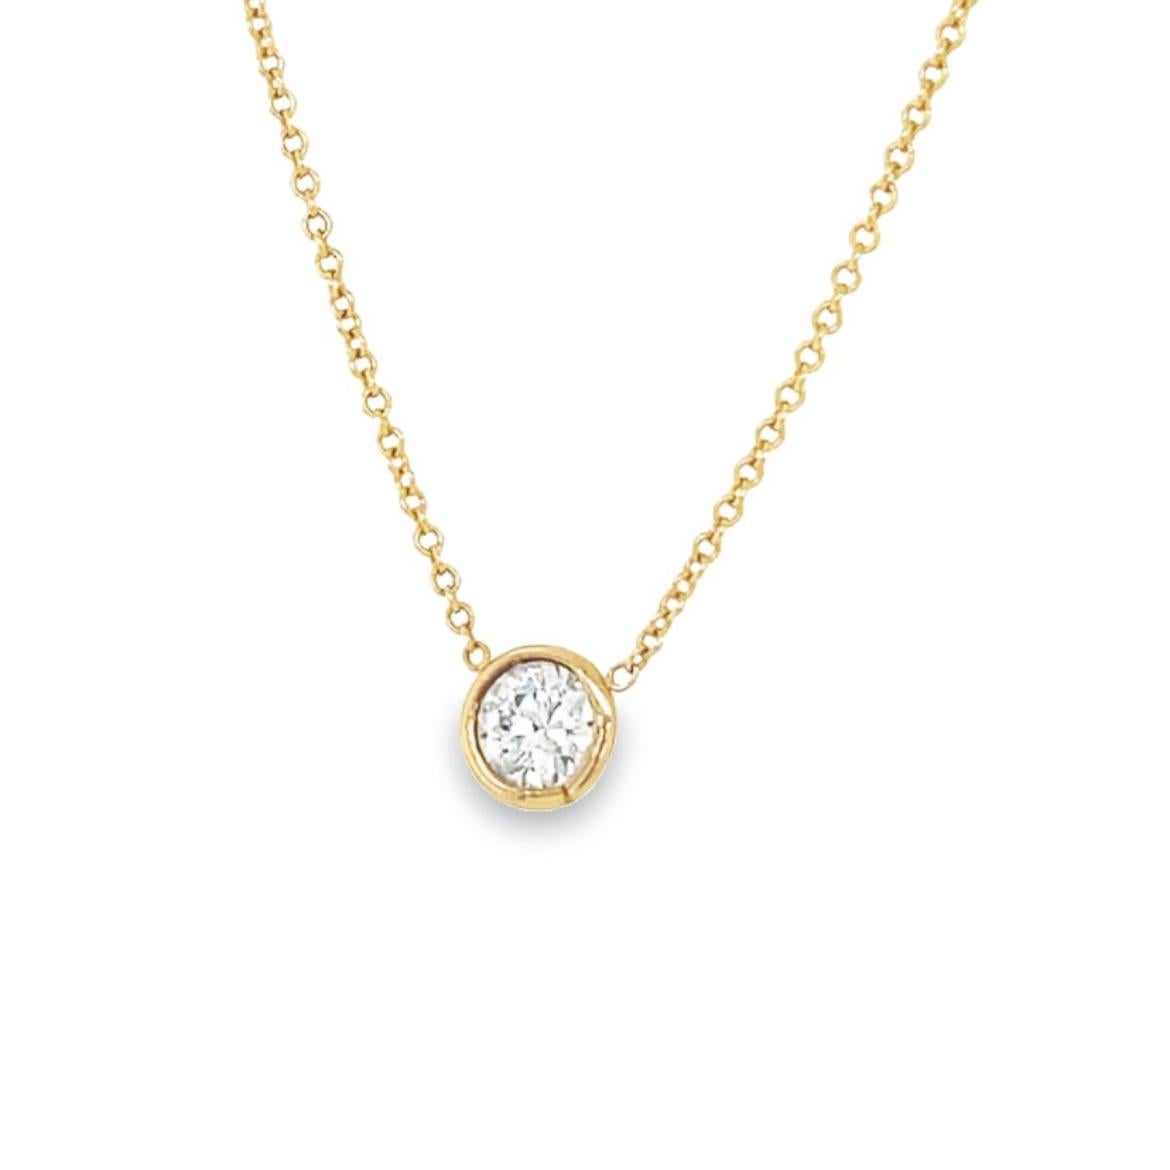 Round Cut Gems Are Forever Bezel Set Diamond Solitaire Necklace in 14k Yellow Gold For Sale